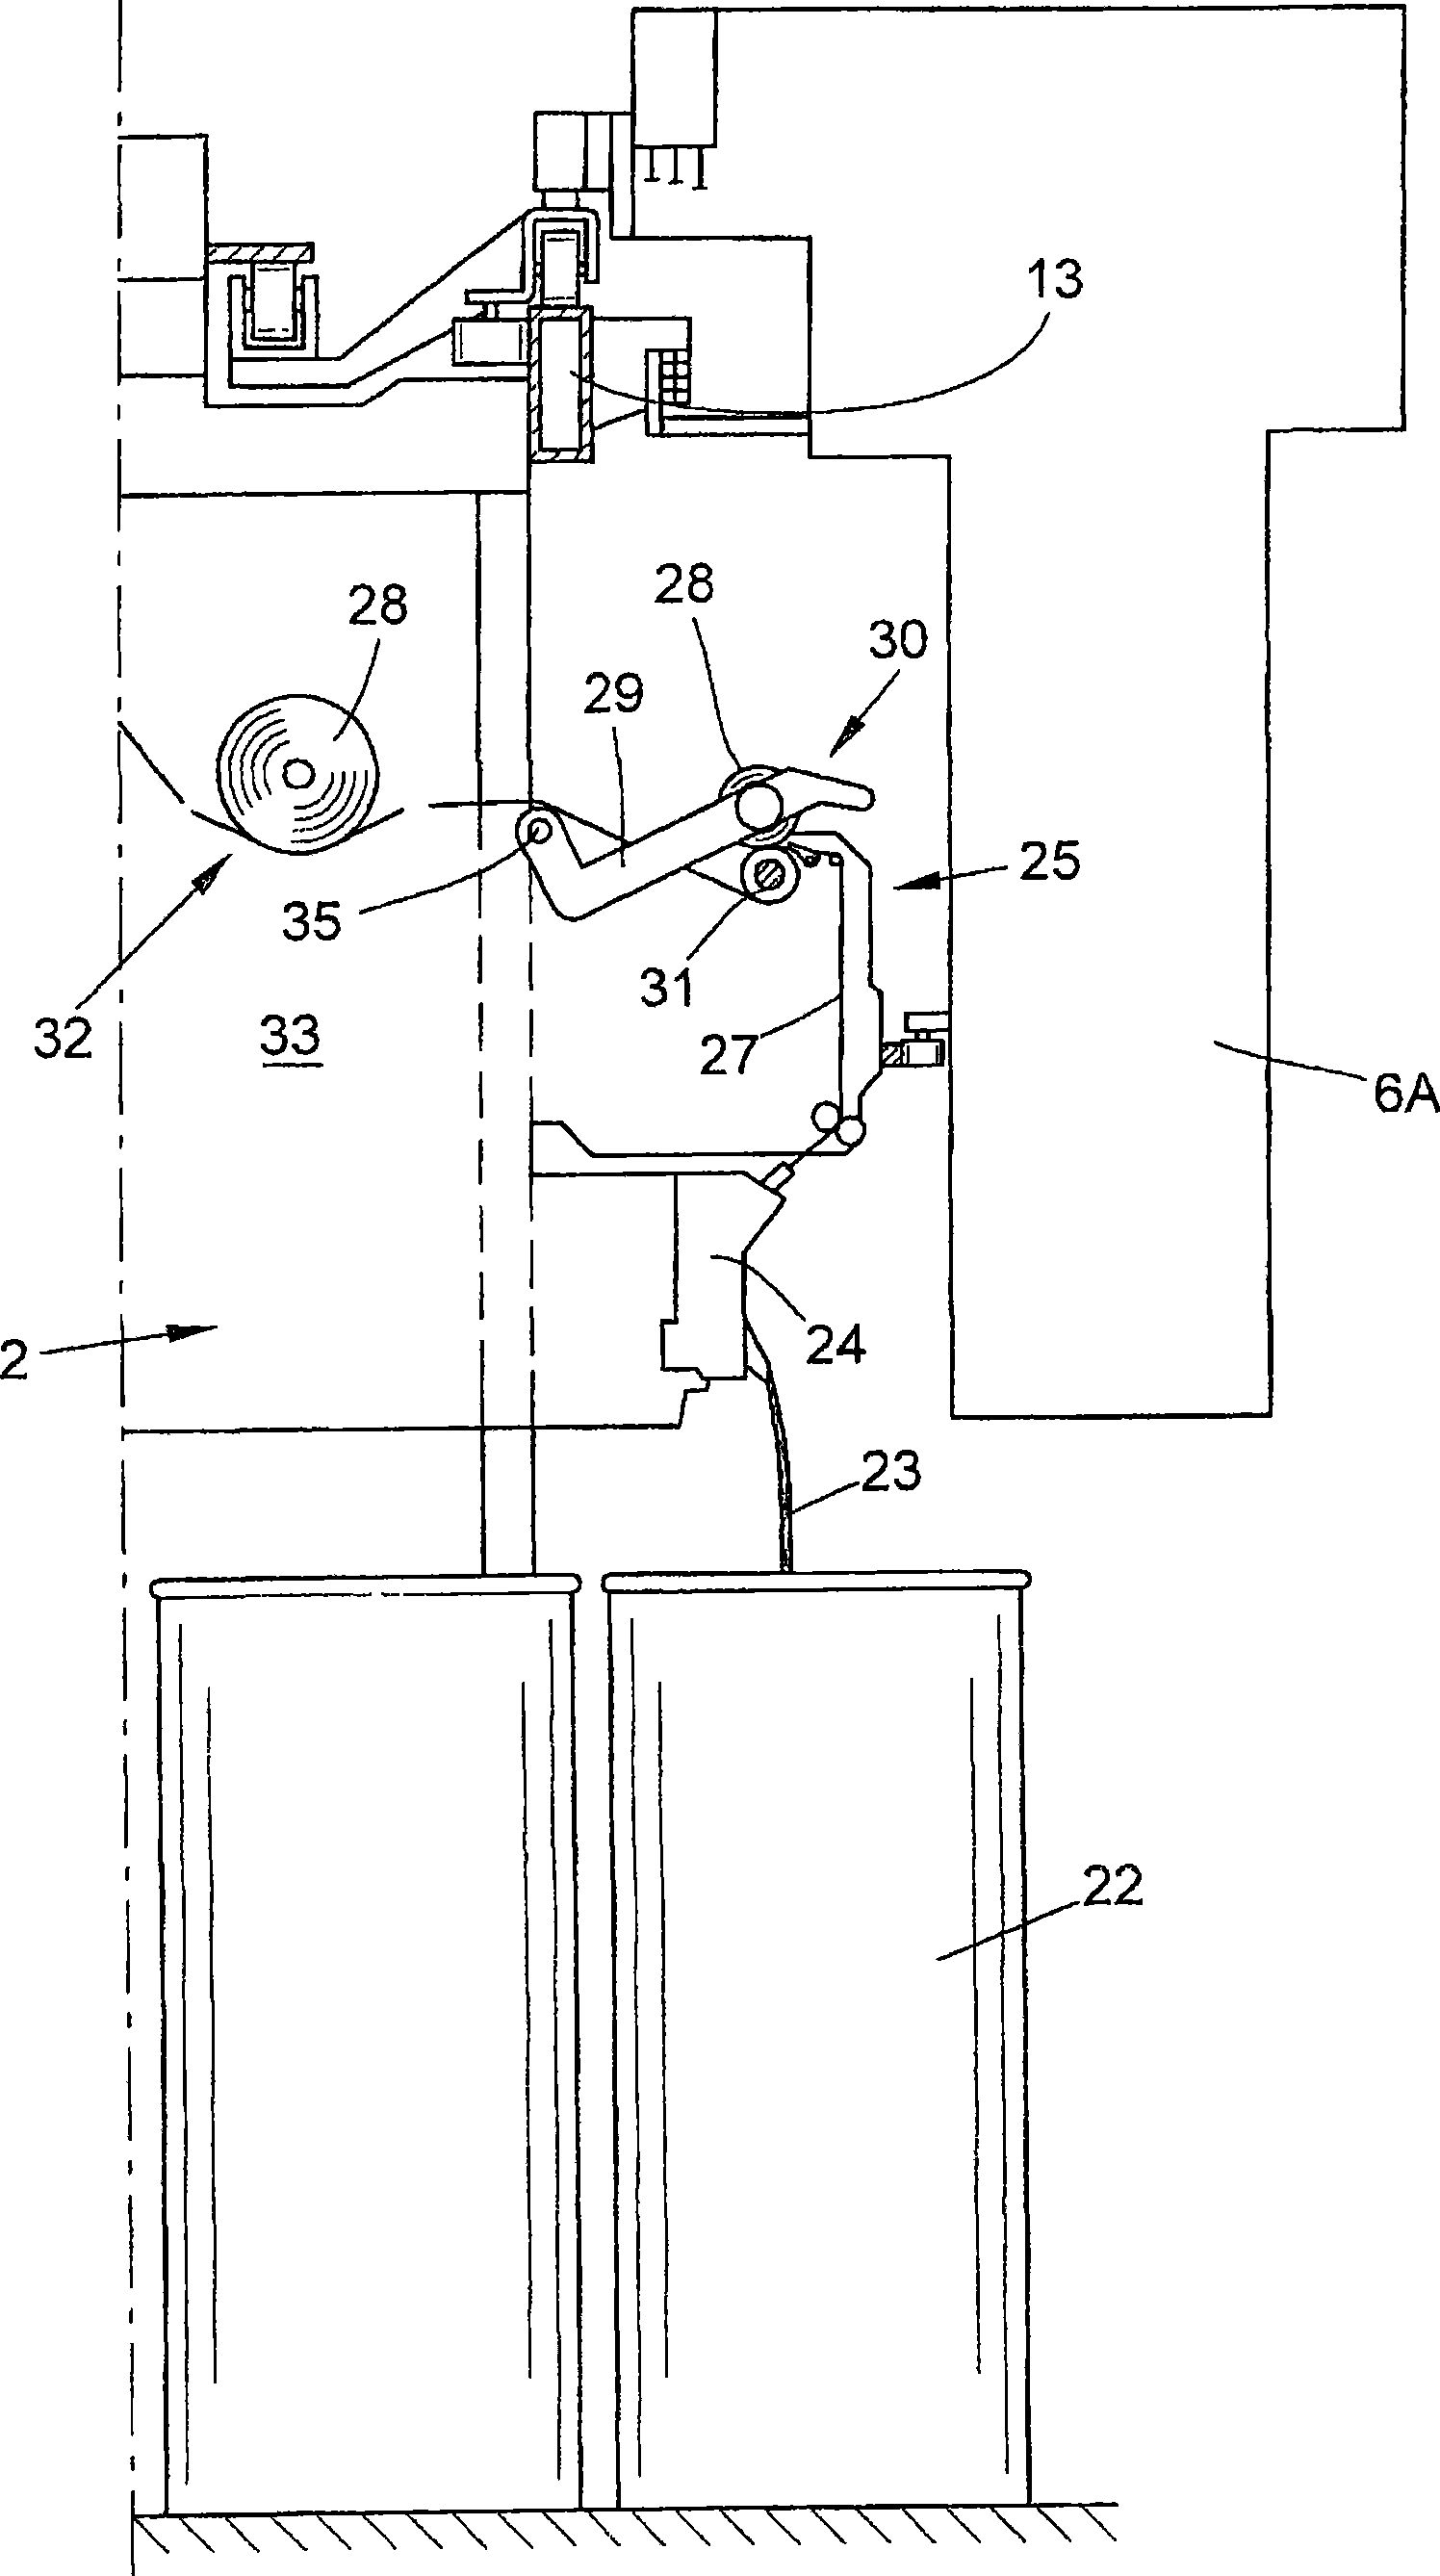 Method for operating a textile machine